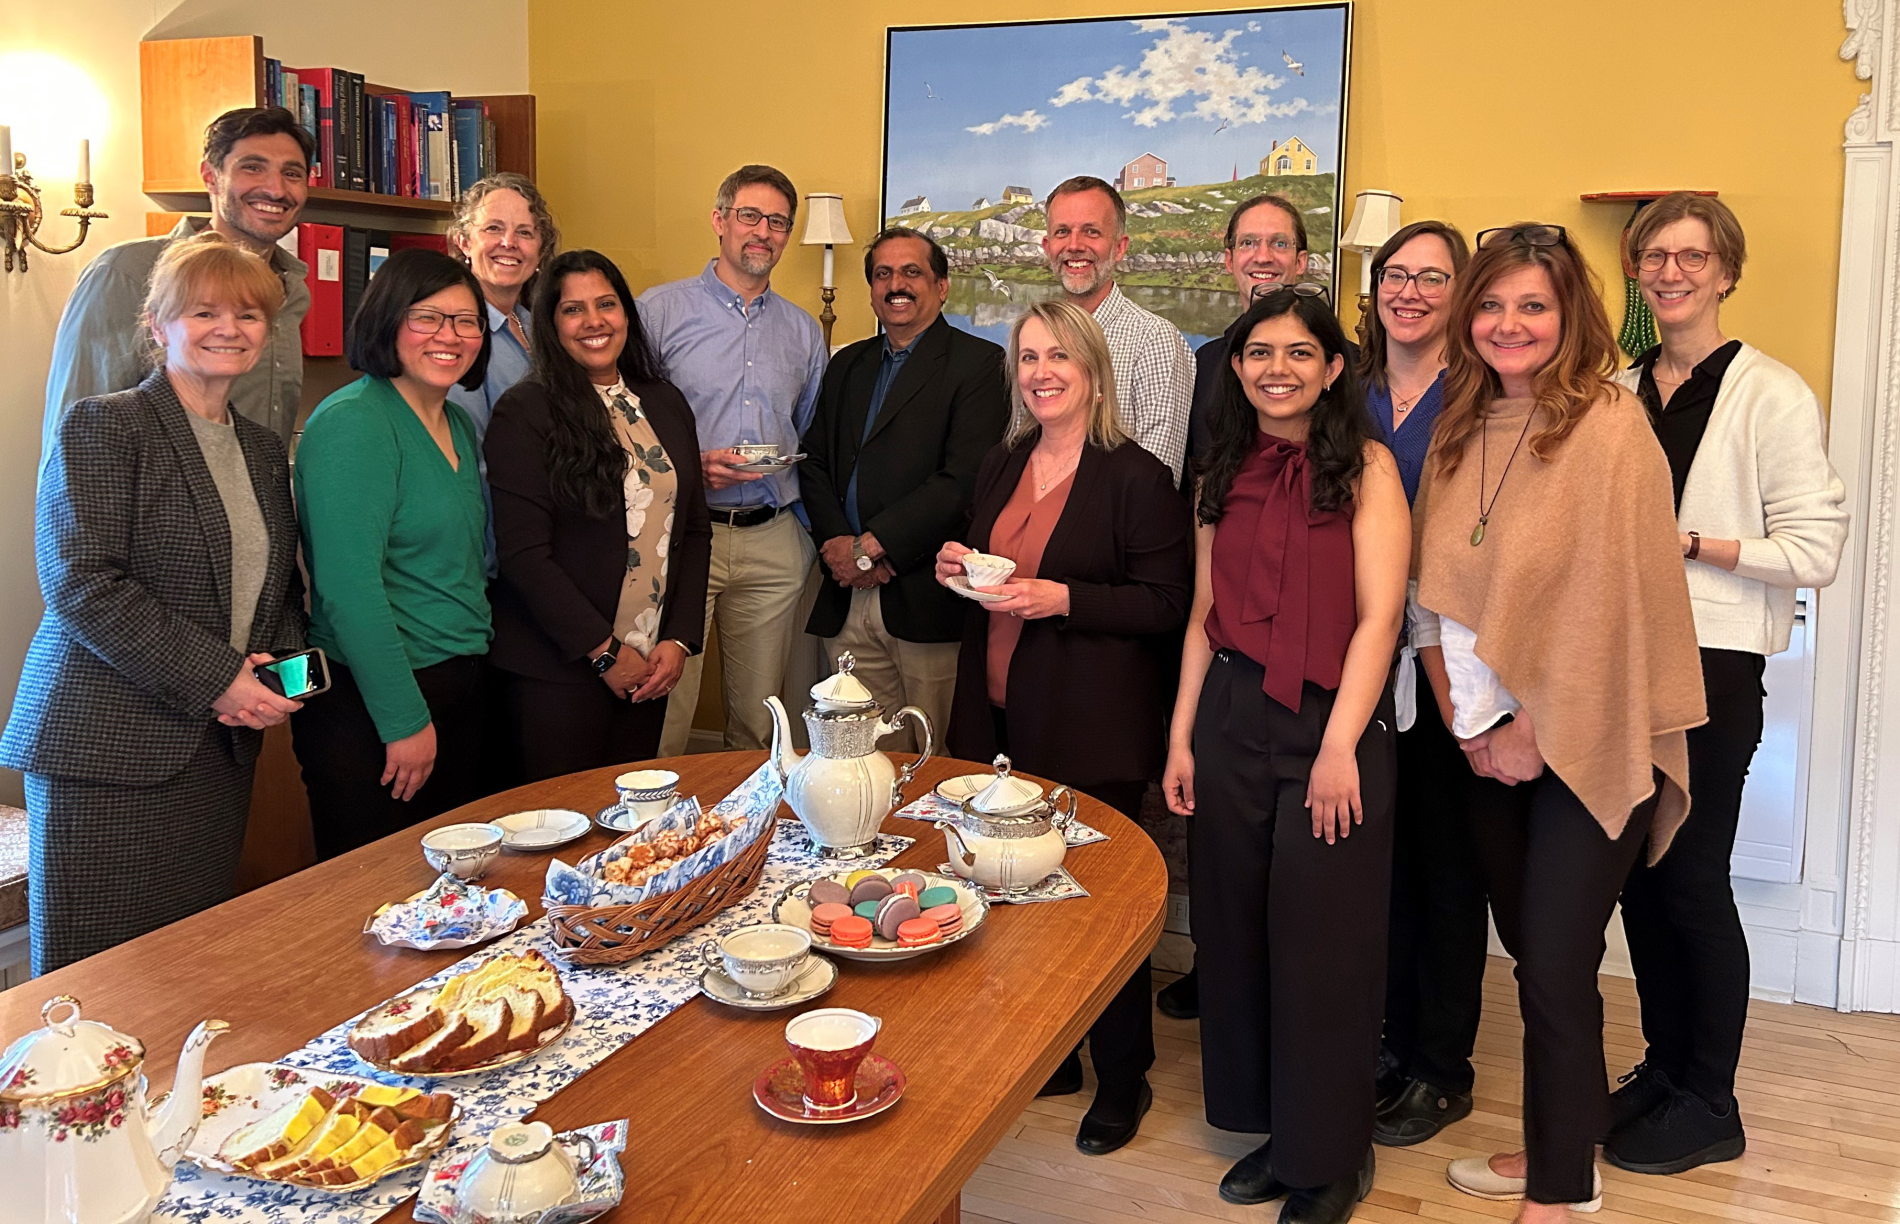 Group  photo of 14 people, in a room with tea and snacks on table, including Professor Maiya in center.